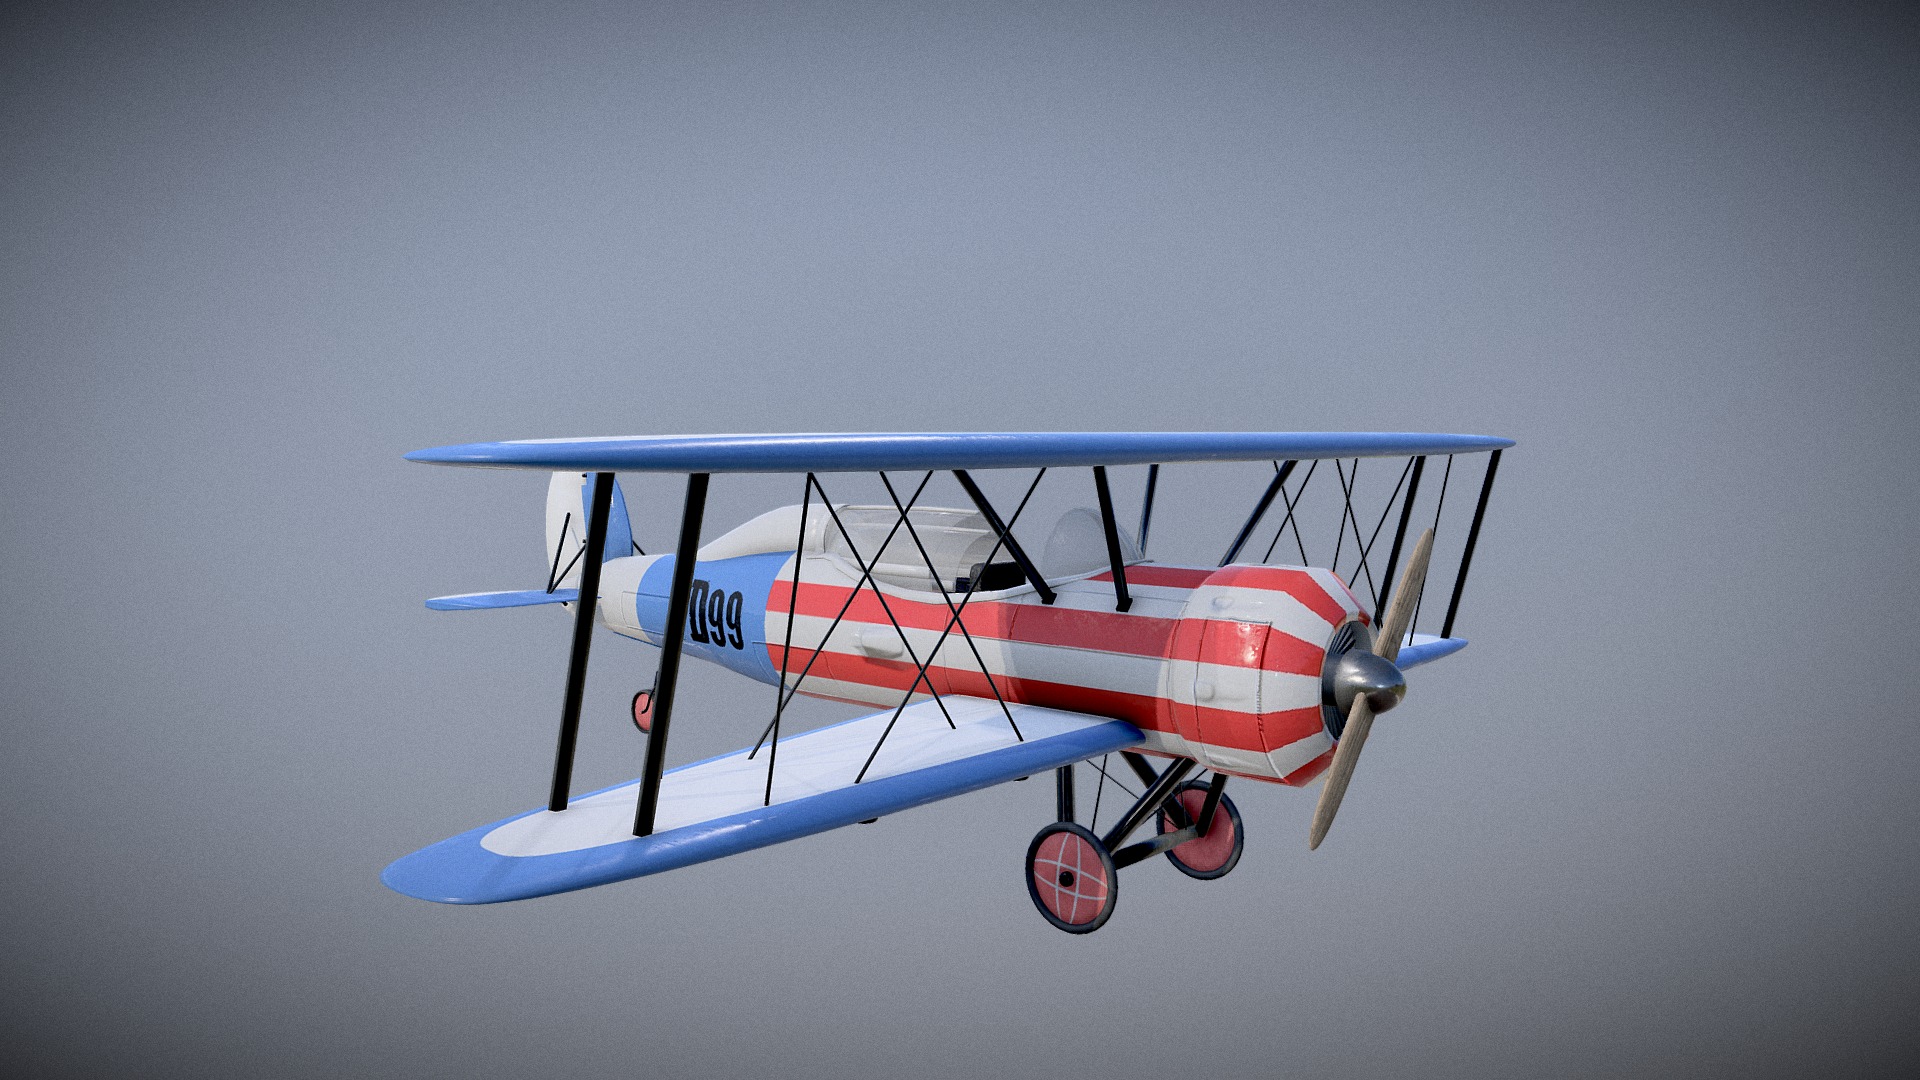 3D model American Style Plane - This is a 3D model of the American Style Plane. The 3D model is about a small airplane flying in the sky.